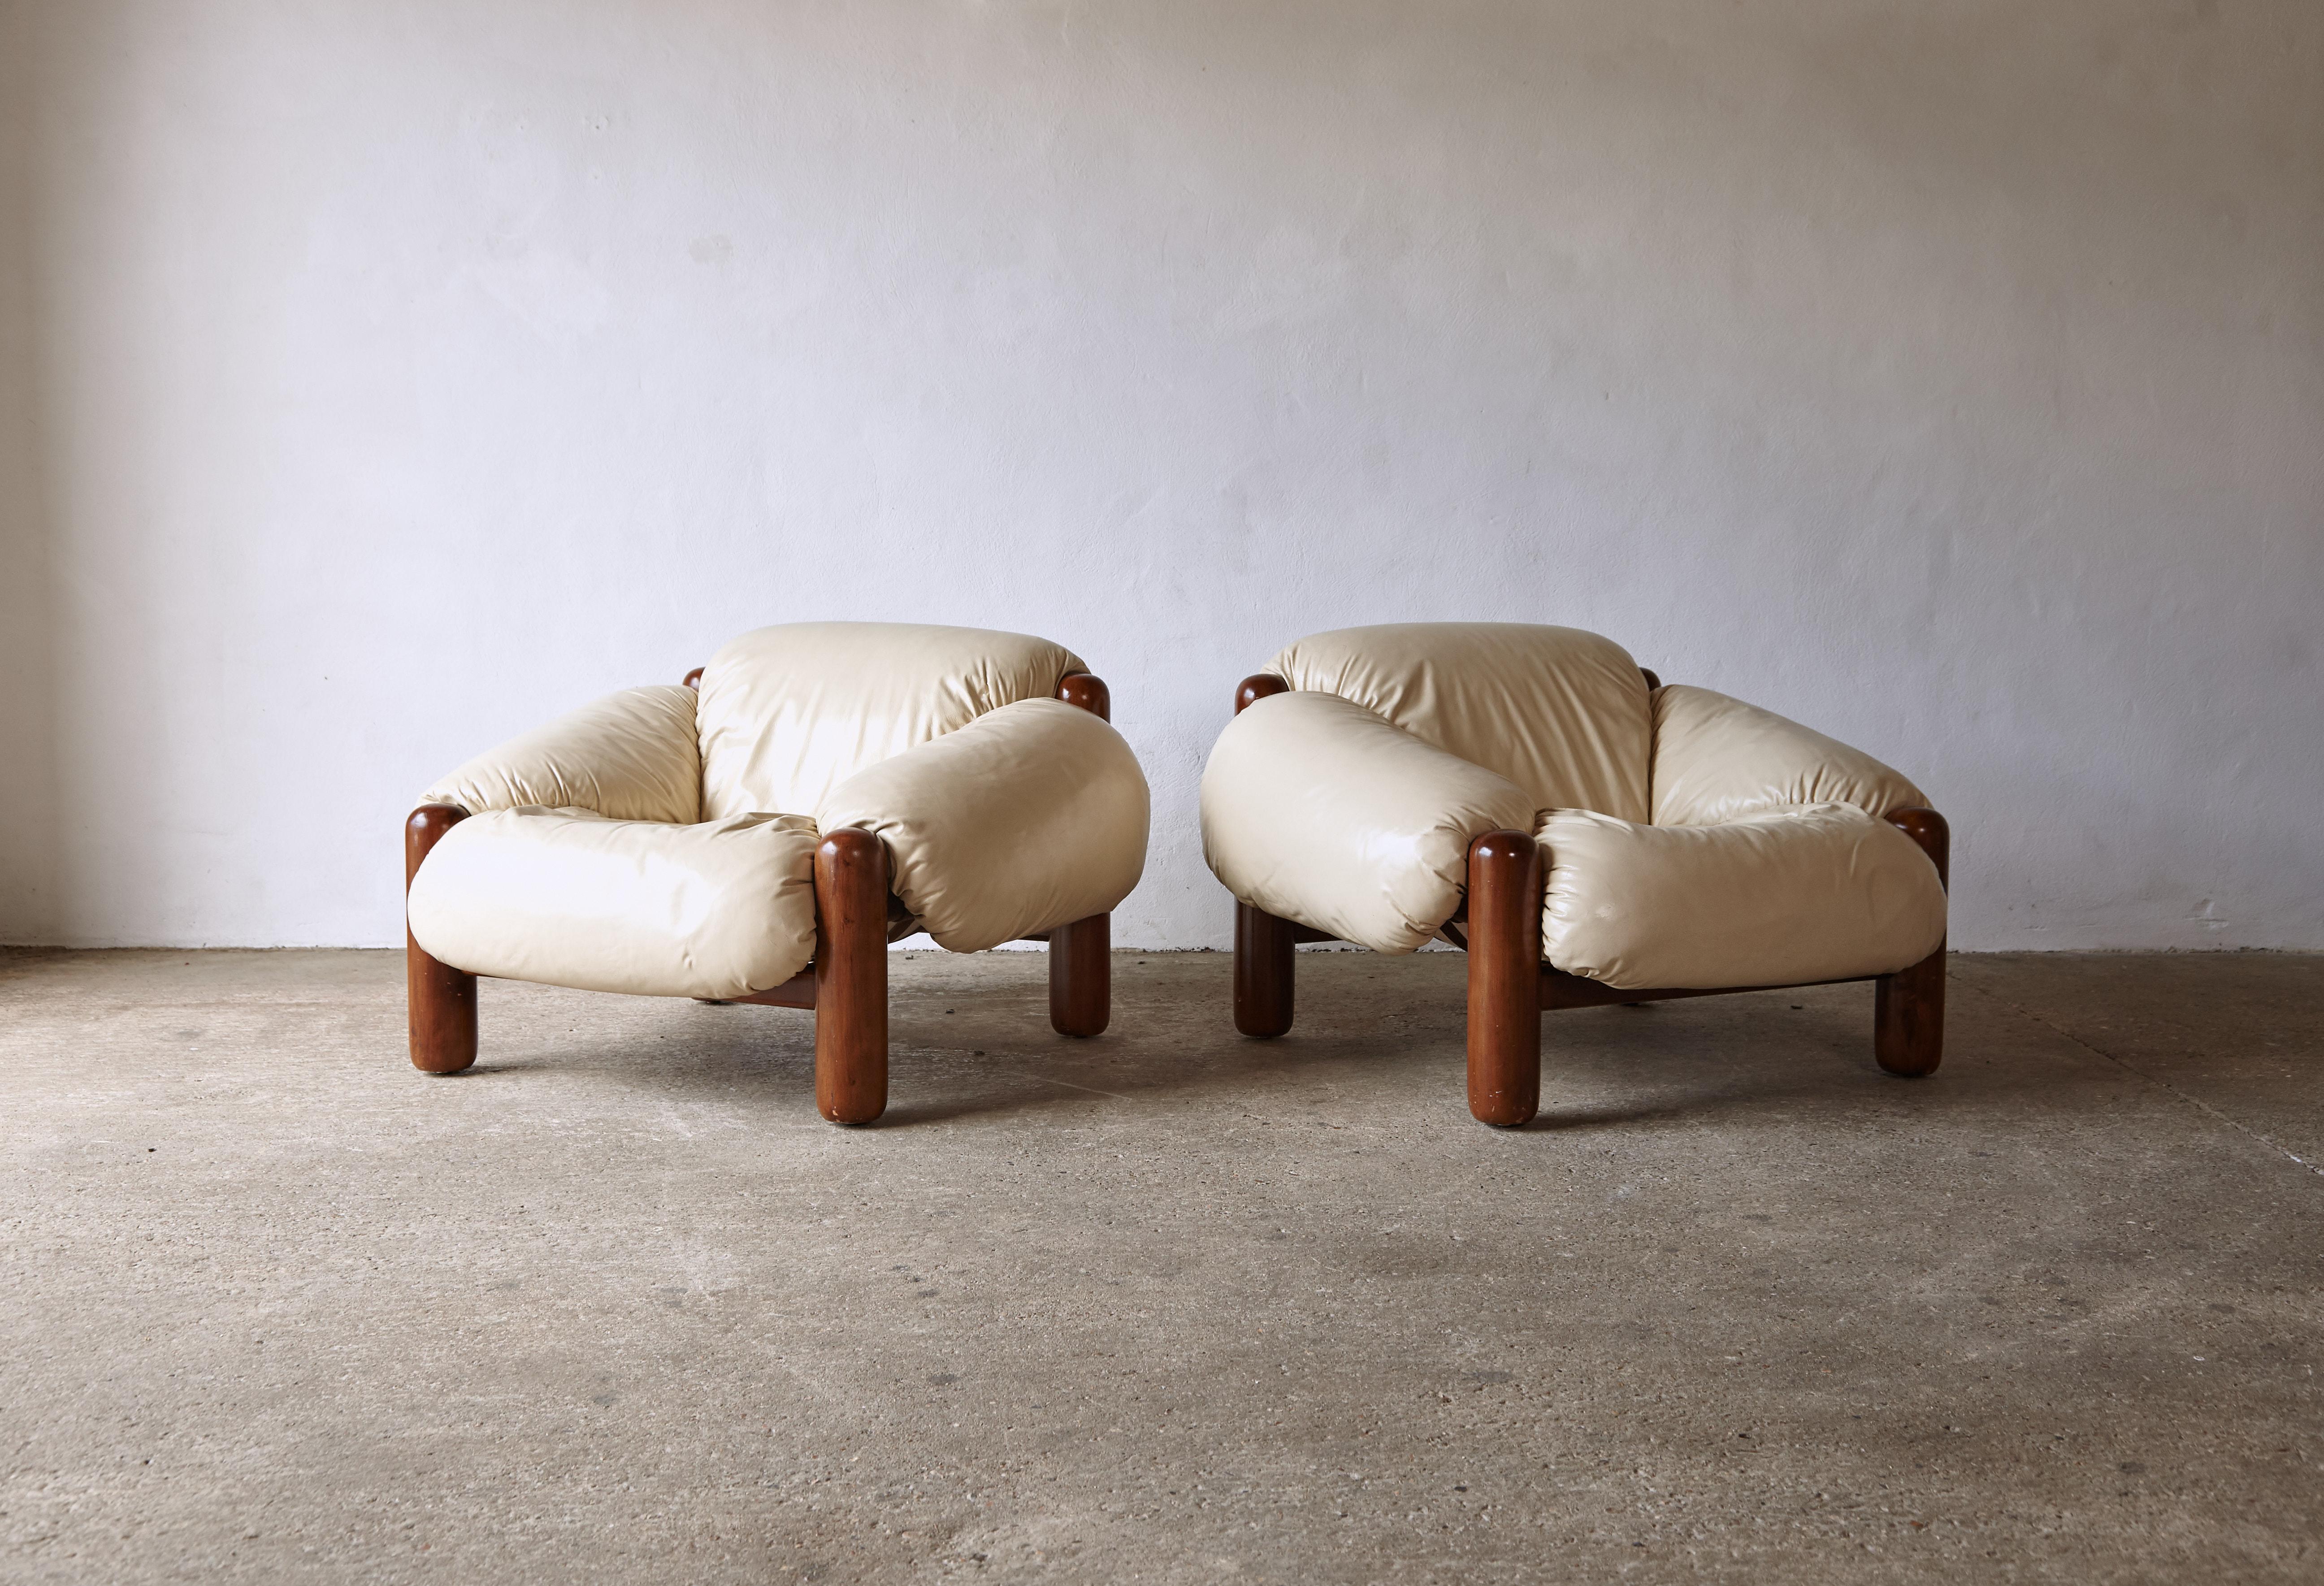 A superb and rarely seen pair of lounge chairs. Made in Italy the chairs nod to Brazilian mid century design. The wooden frames are in original condition, structurally sound, with some signs of use and age. The original cream leather fabric shows